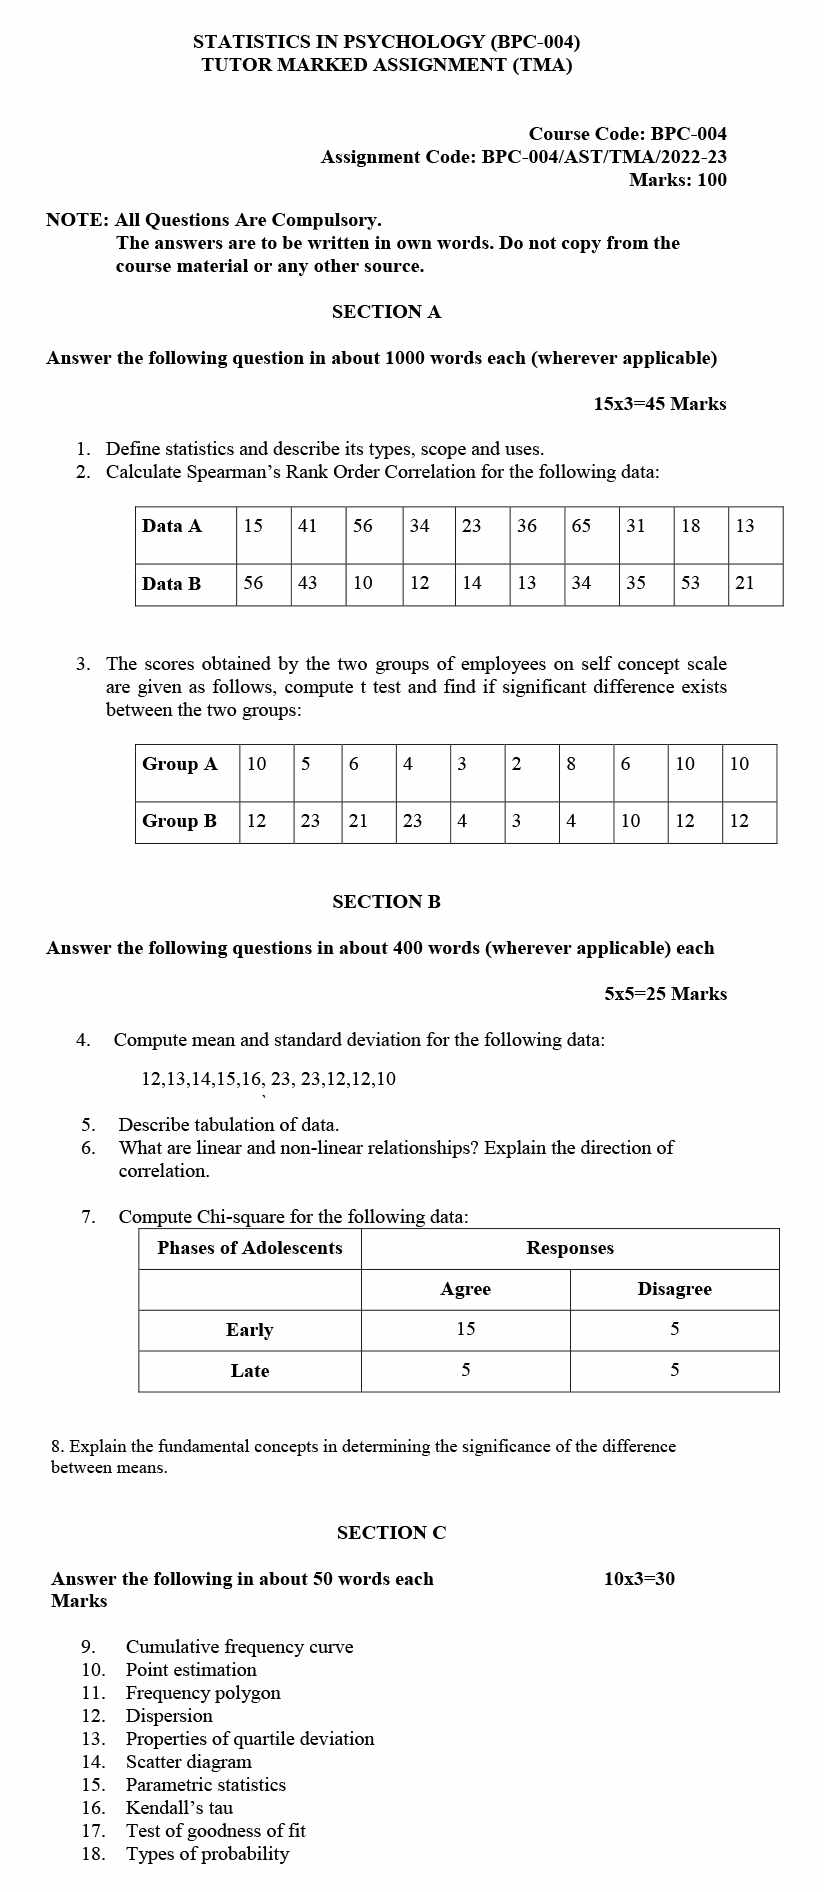 IGNOU BPC-04 - Statistics in Psychology Latest Solved Assignment-July 2022 – January 2023